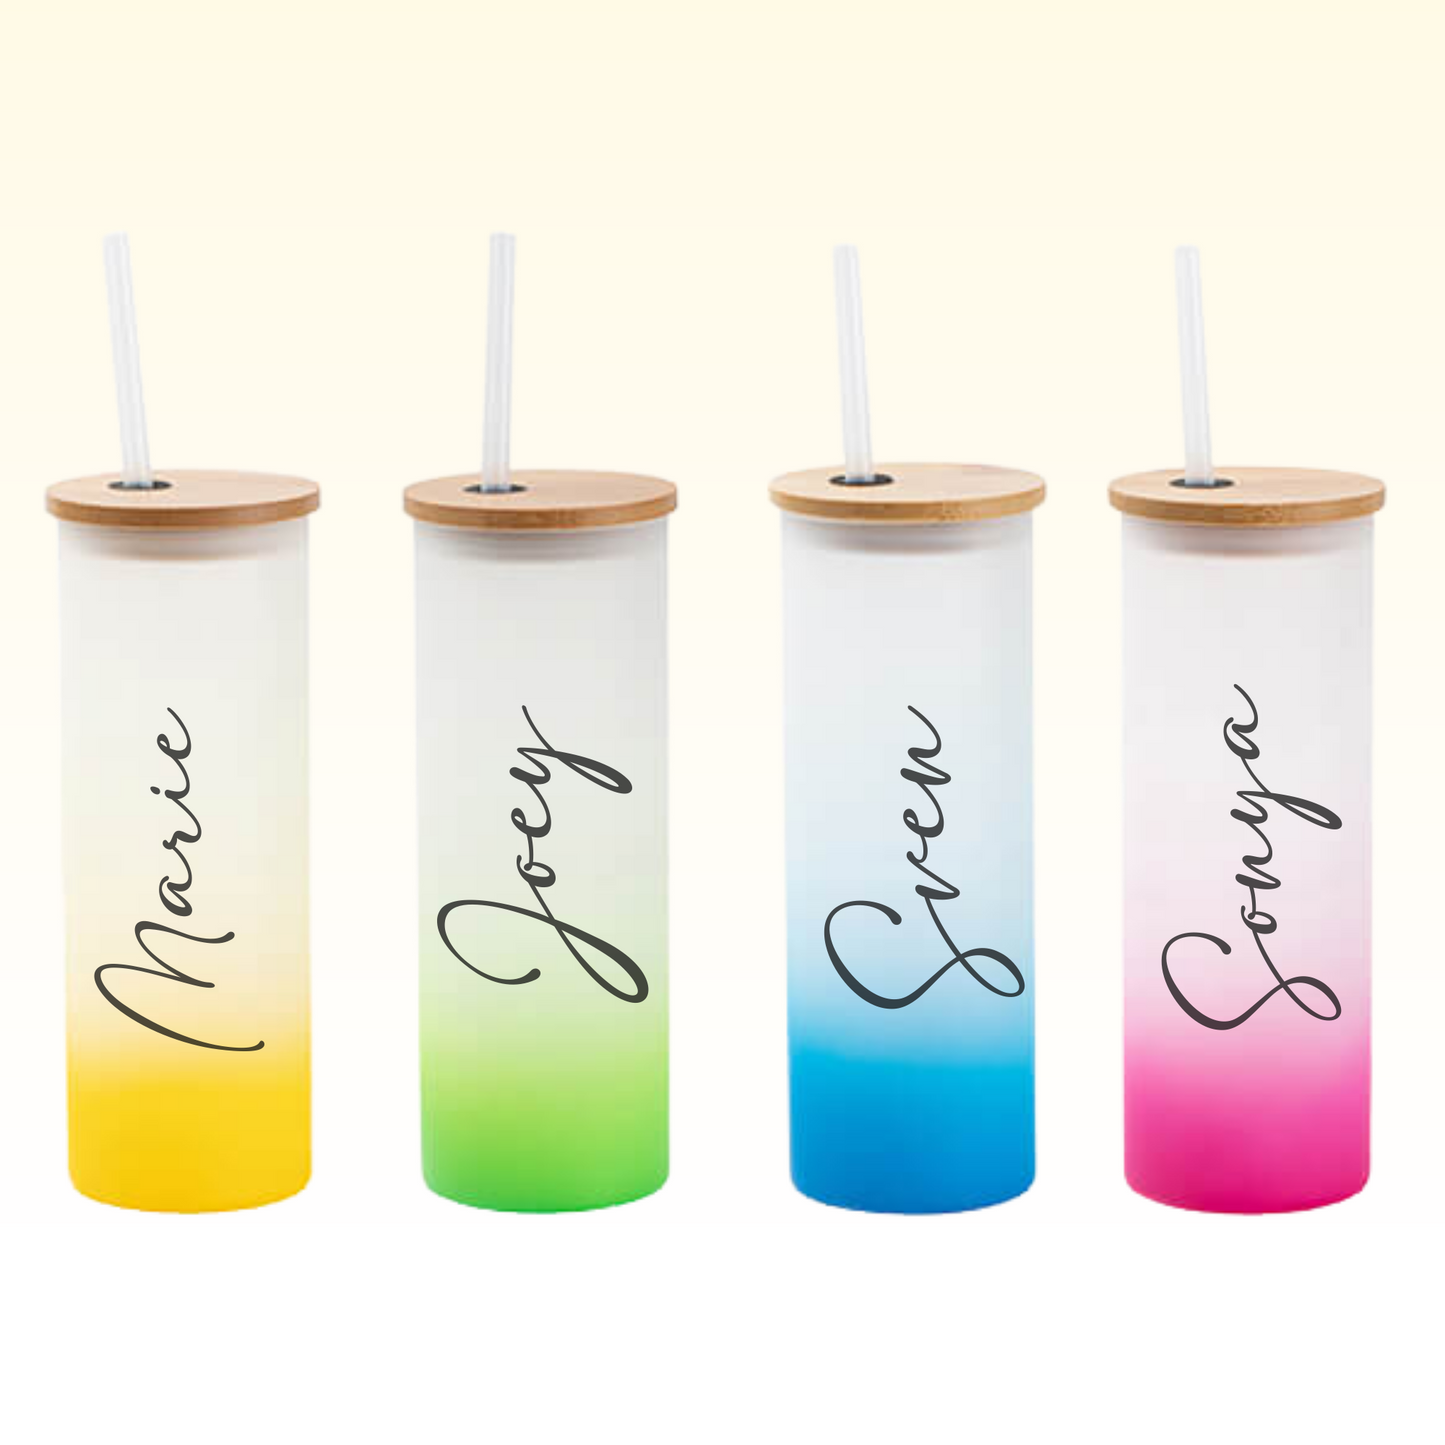 Drinking glass frosted personalized in 4 colors - tumbler with name - cocktail glass with bamboo lid and straw - personalized gift